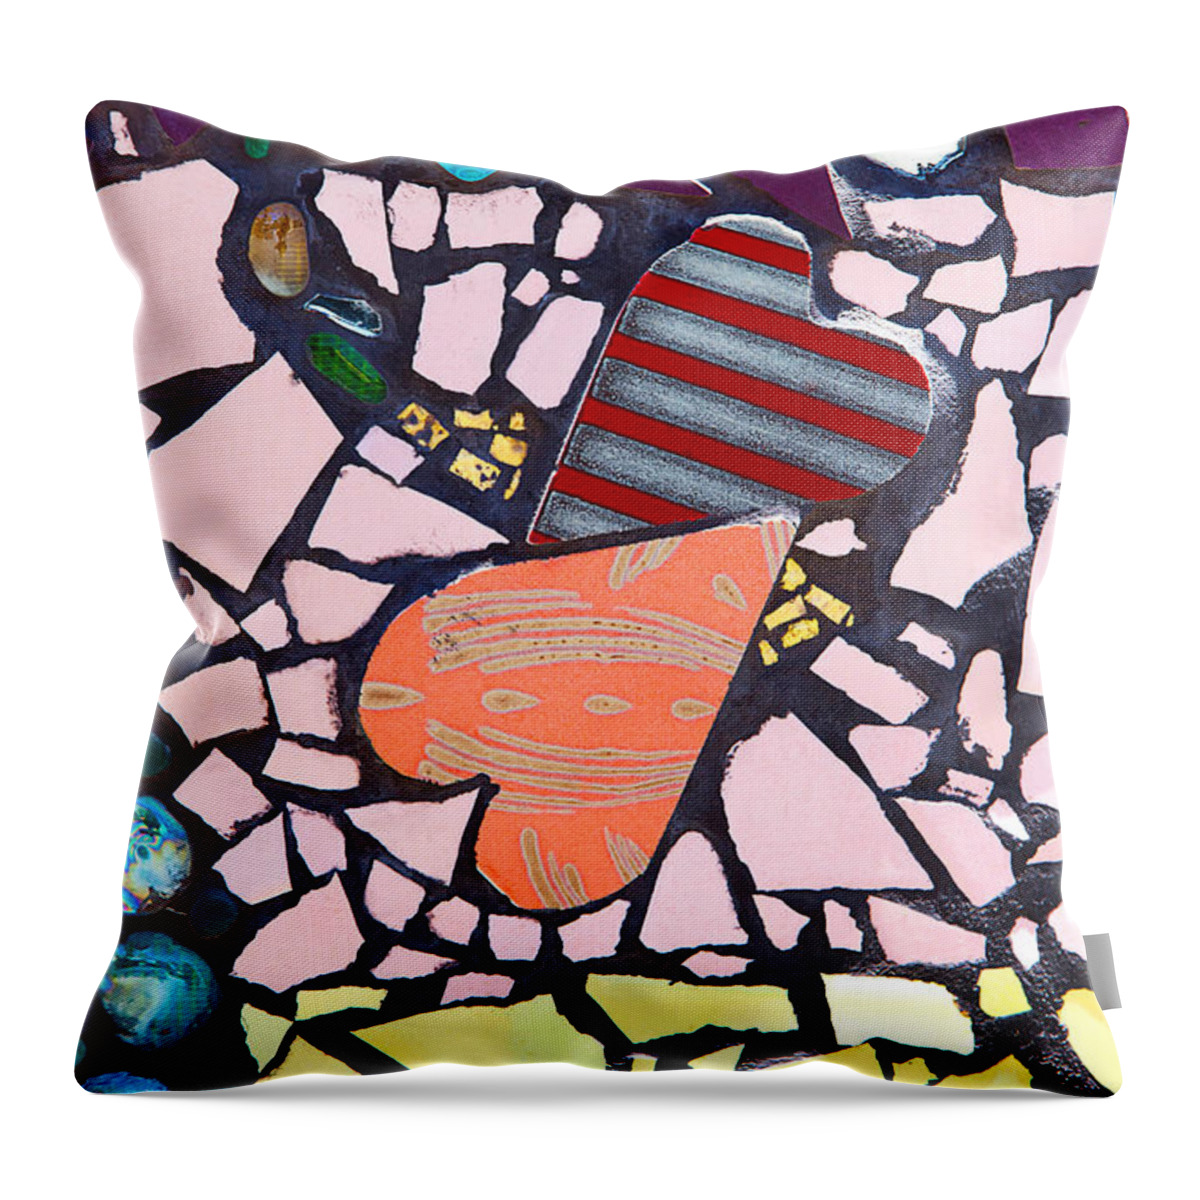 Hearts Throw Pillow featuring the photograph Two Hearts Mosaic by Art Block Collections